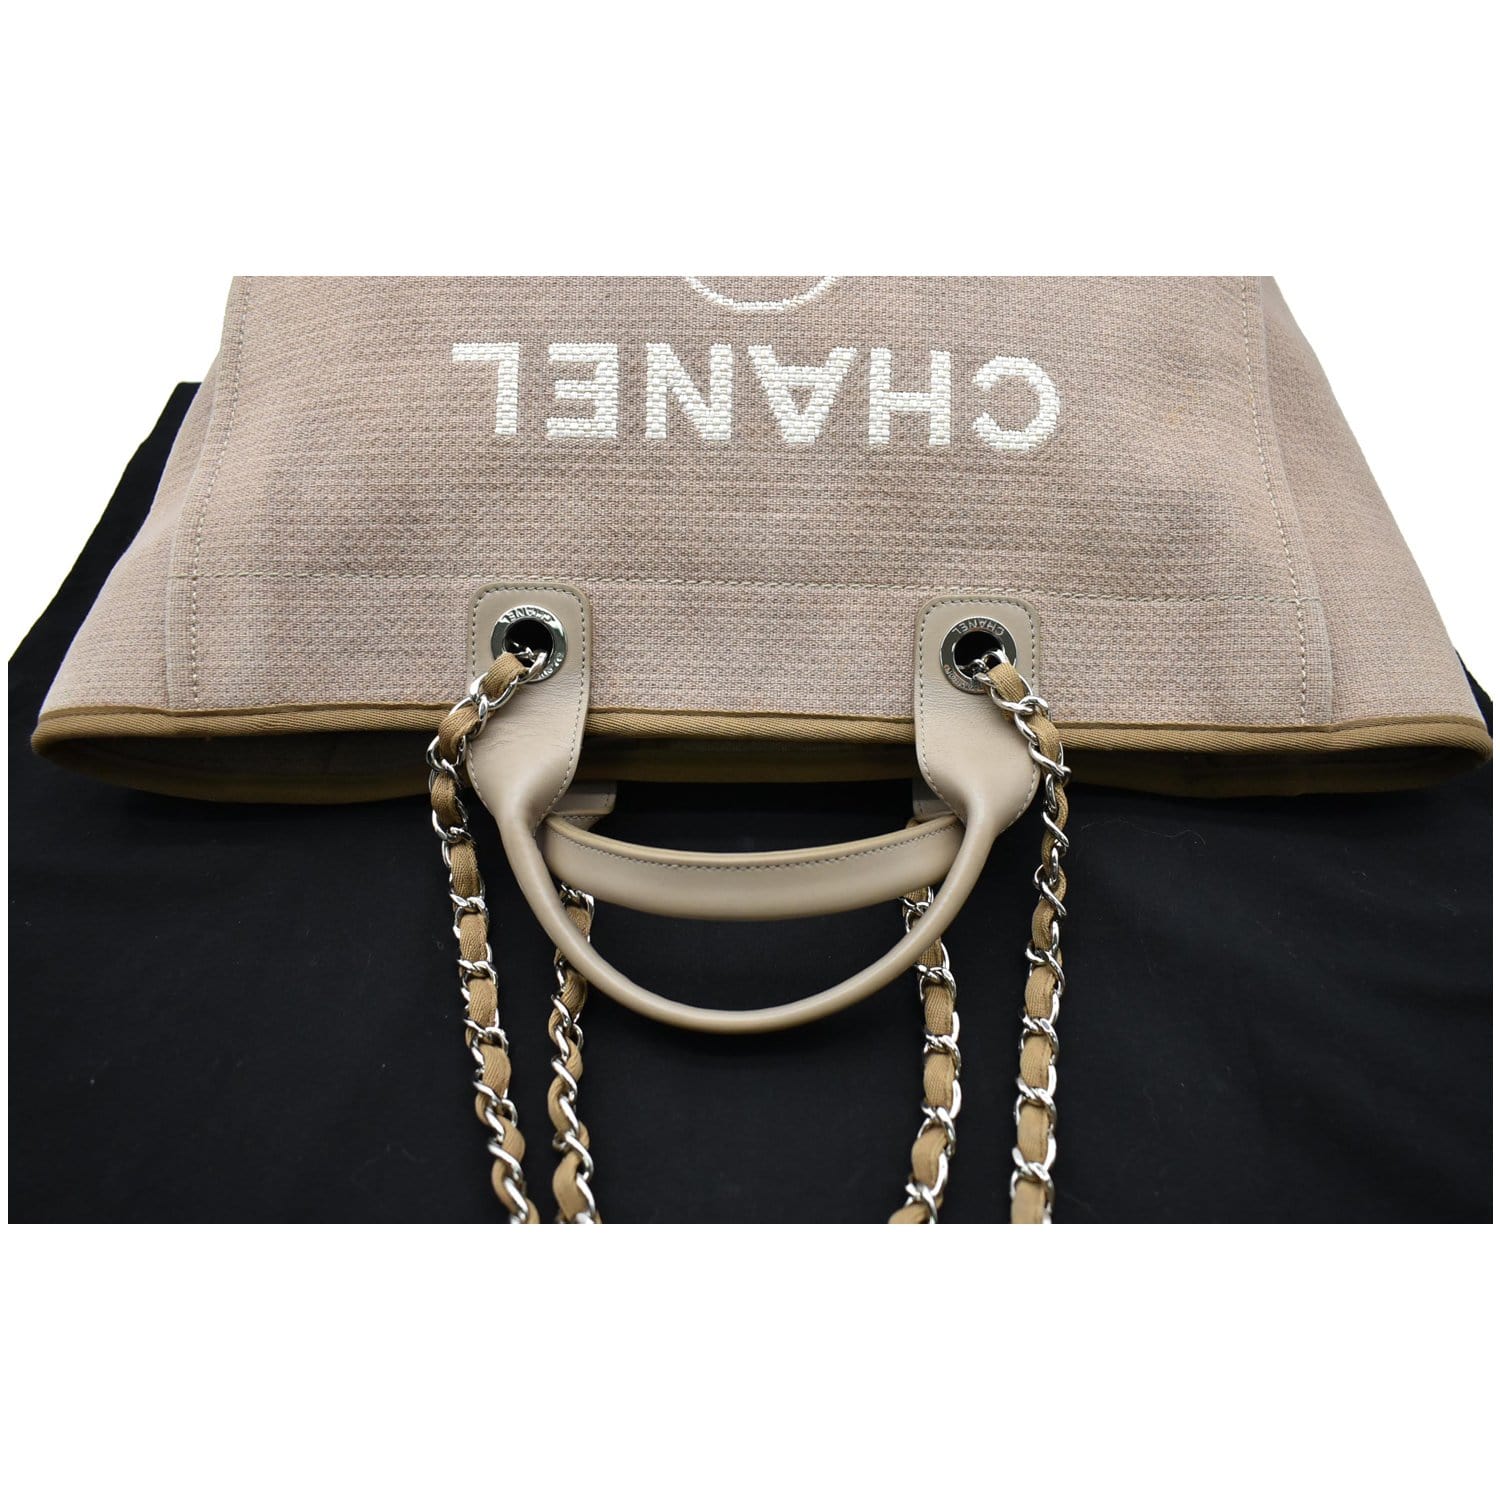 Chanel Beige Canvas Deauville Tote Bag Chanel